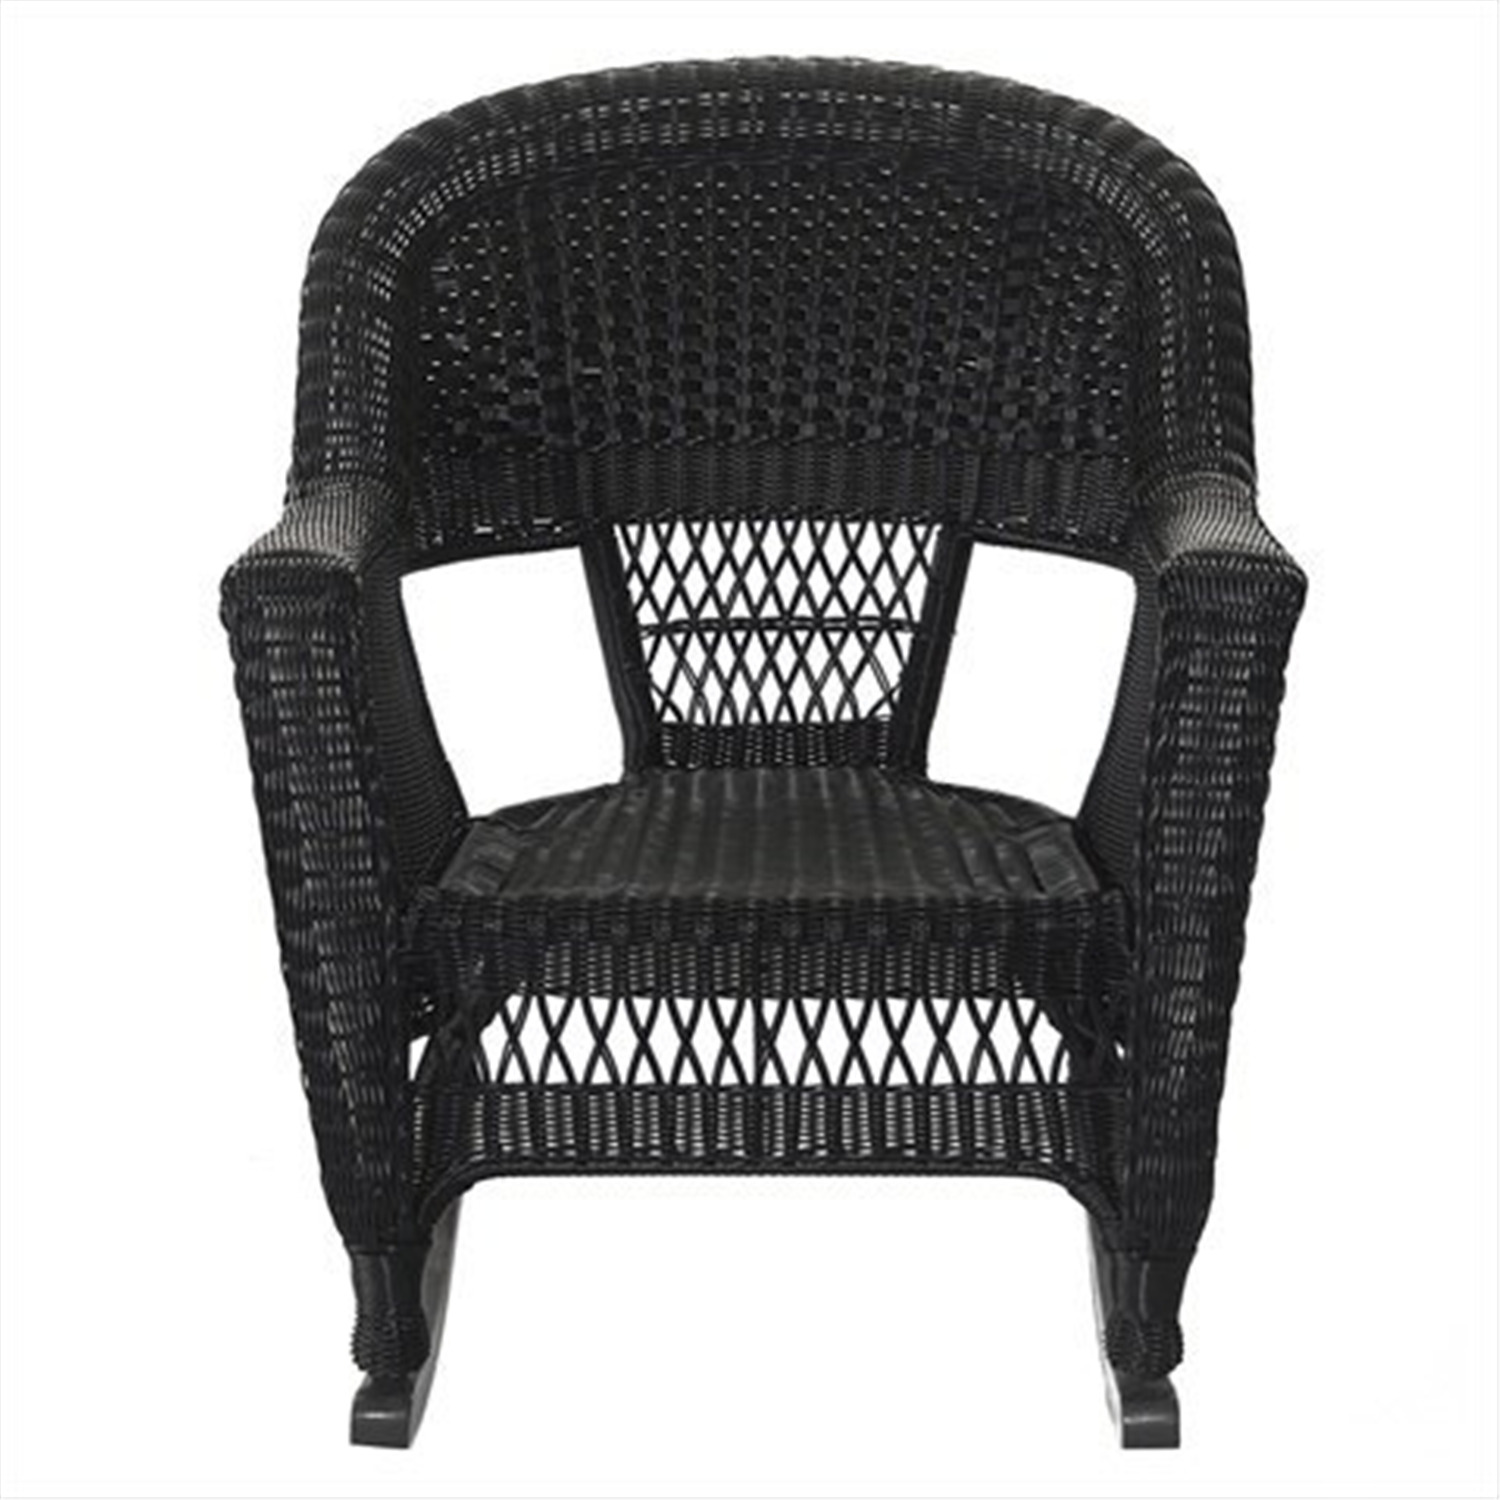 Jeco 3pc Rocker Wicker Chair Set With Red Cushion-Finish:Black - image 1 of 4